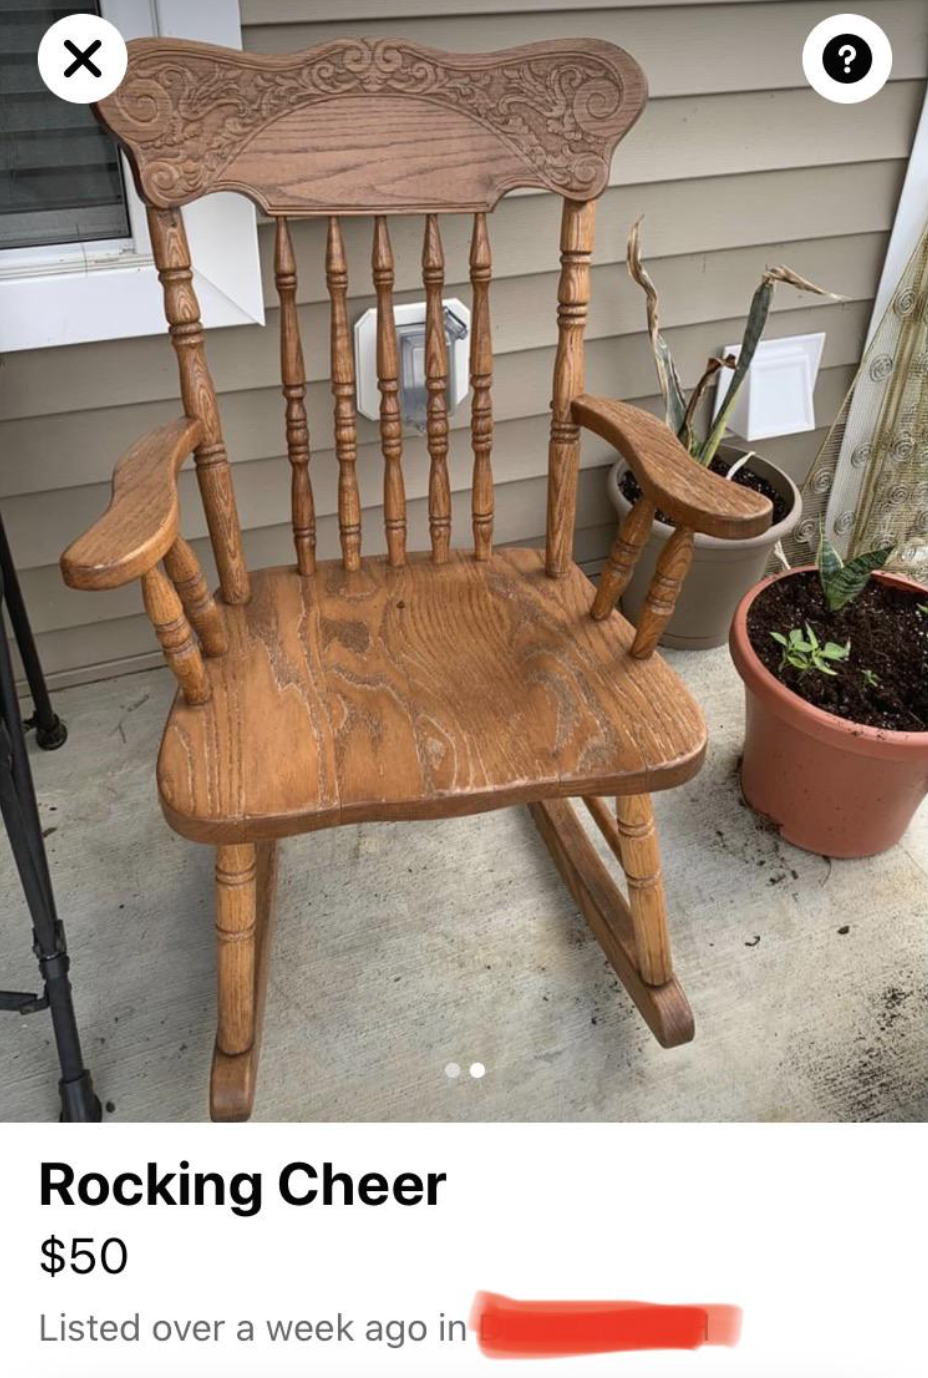 Chair for sale reading, &quot;Rocking cheer&quot;